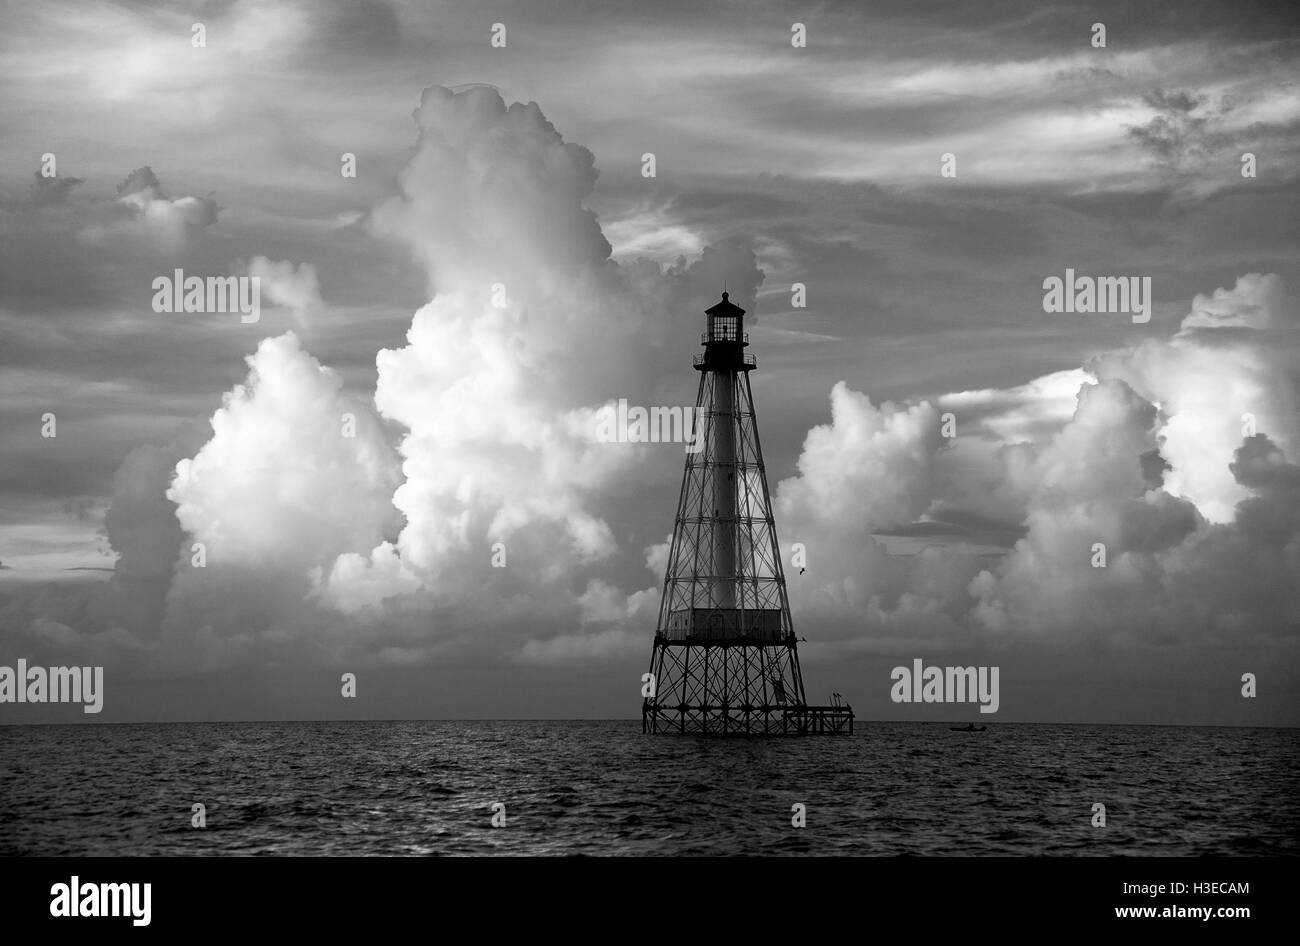 Once the site of a shipwreck, Alligator Reef Light looks beautiful at dawn with summer clouds side-lit by the rising sun. Stock Photo